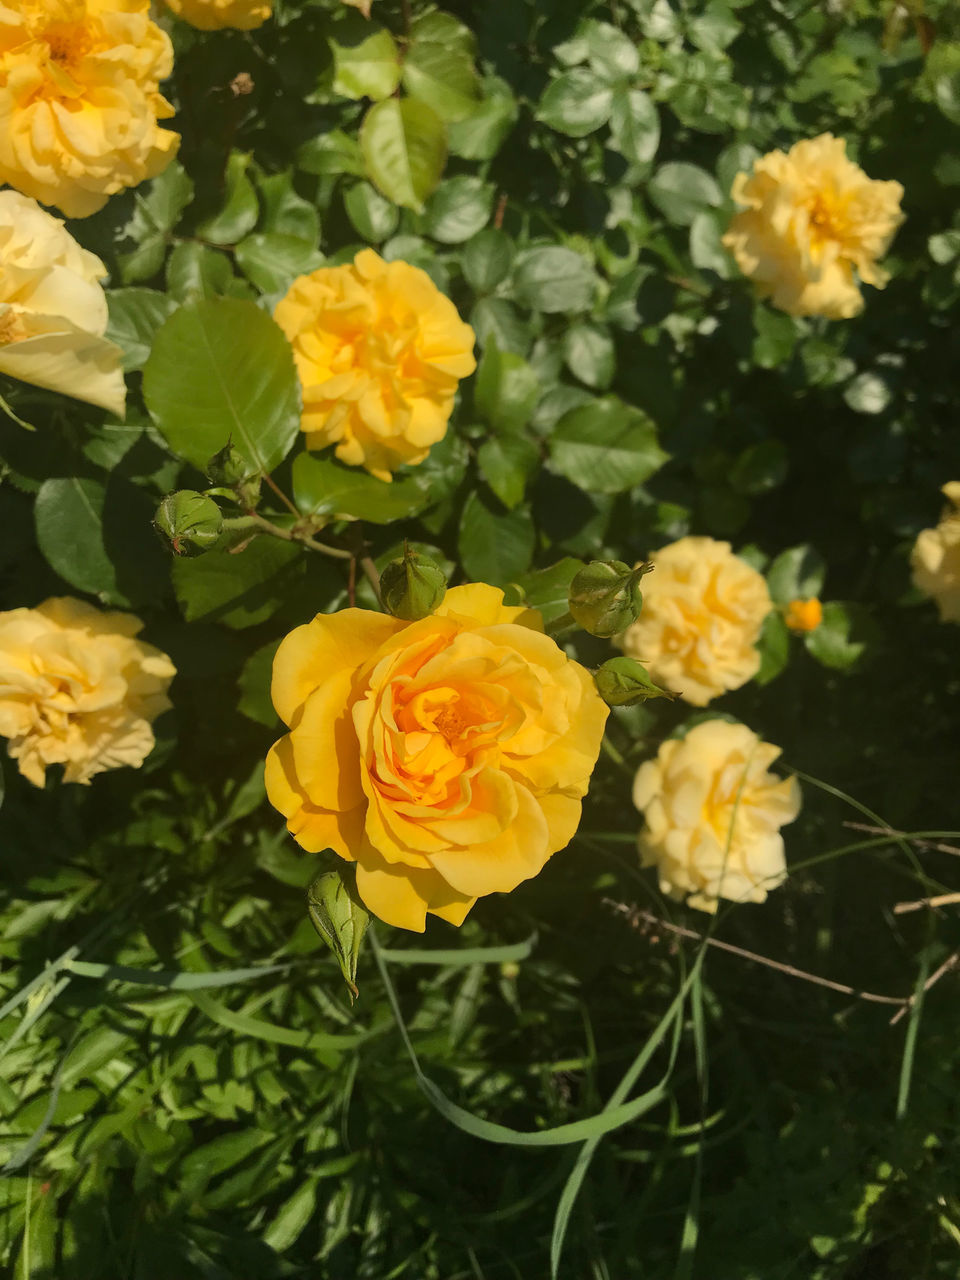 HIGH ANGLE VIEW OF YELLOW ROSES IN BLOOM